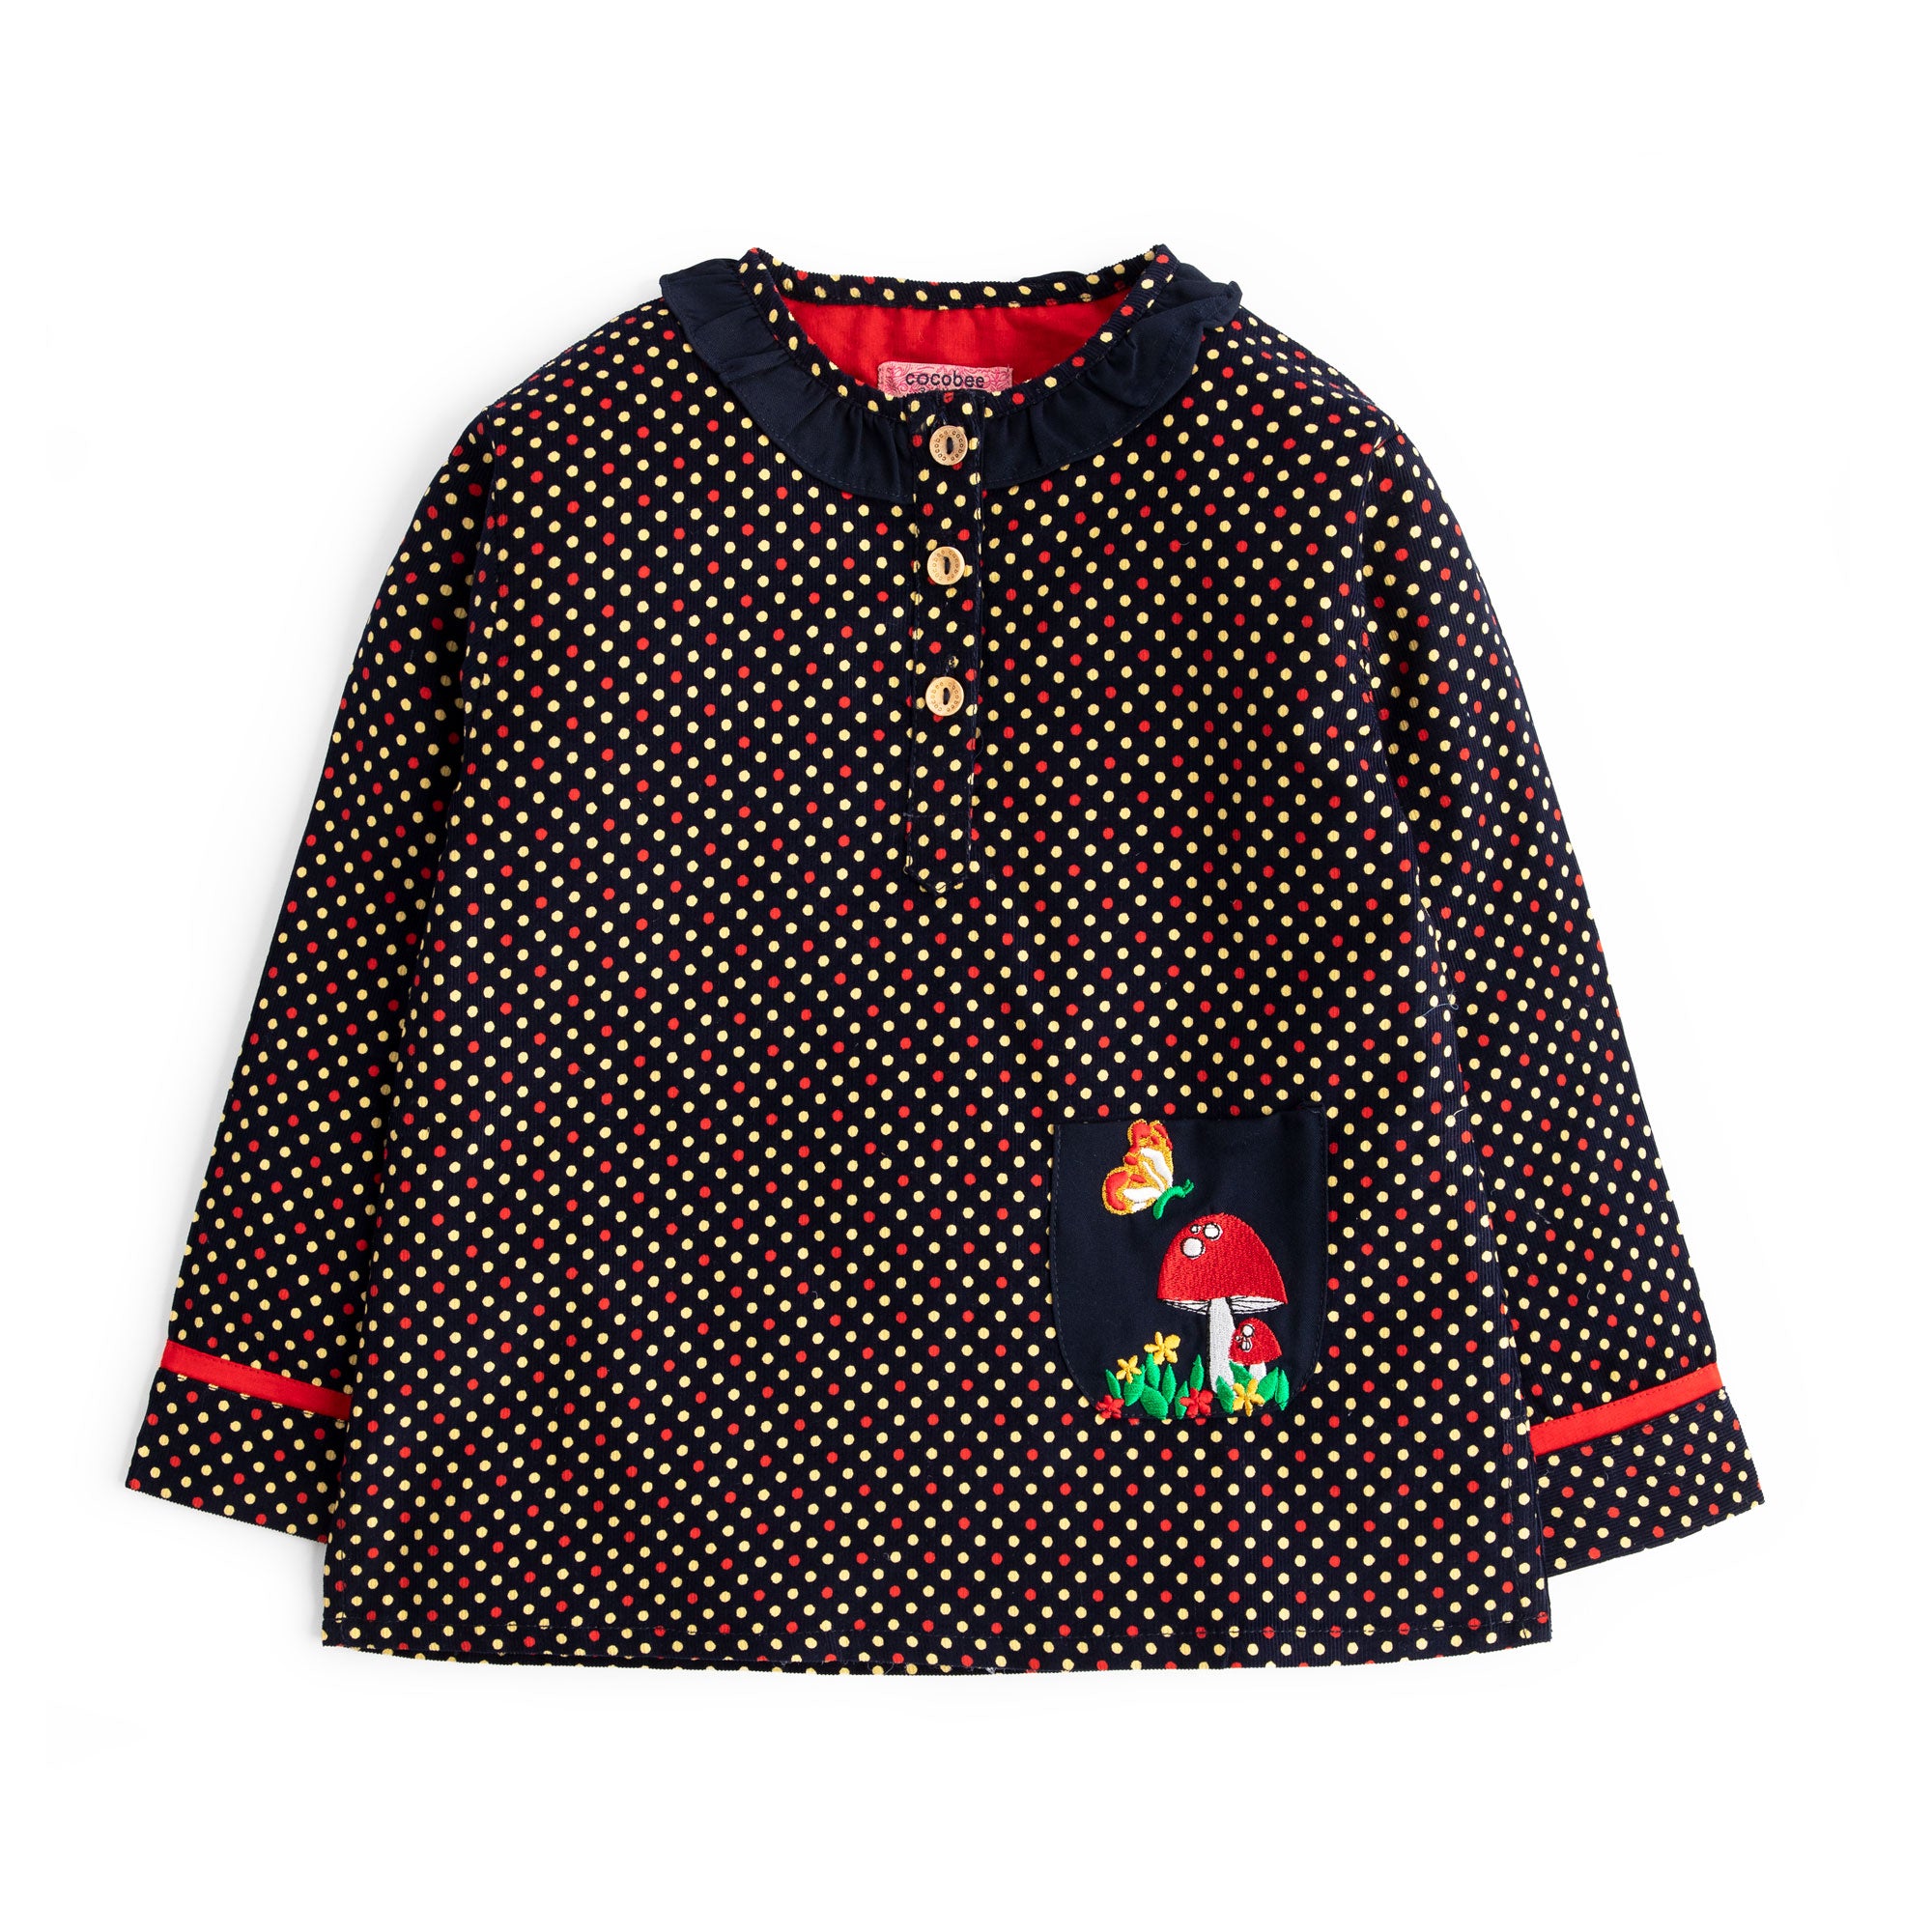 Dotted Corduroy Top